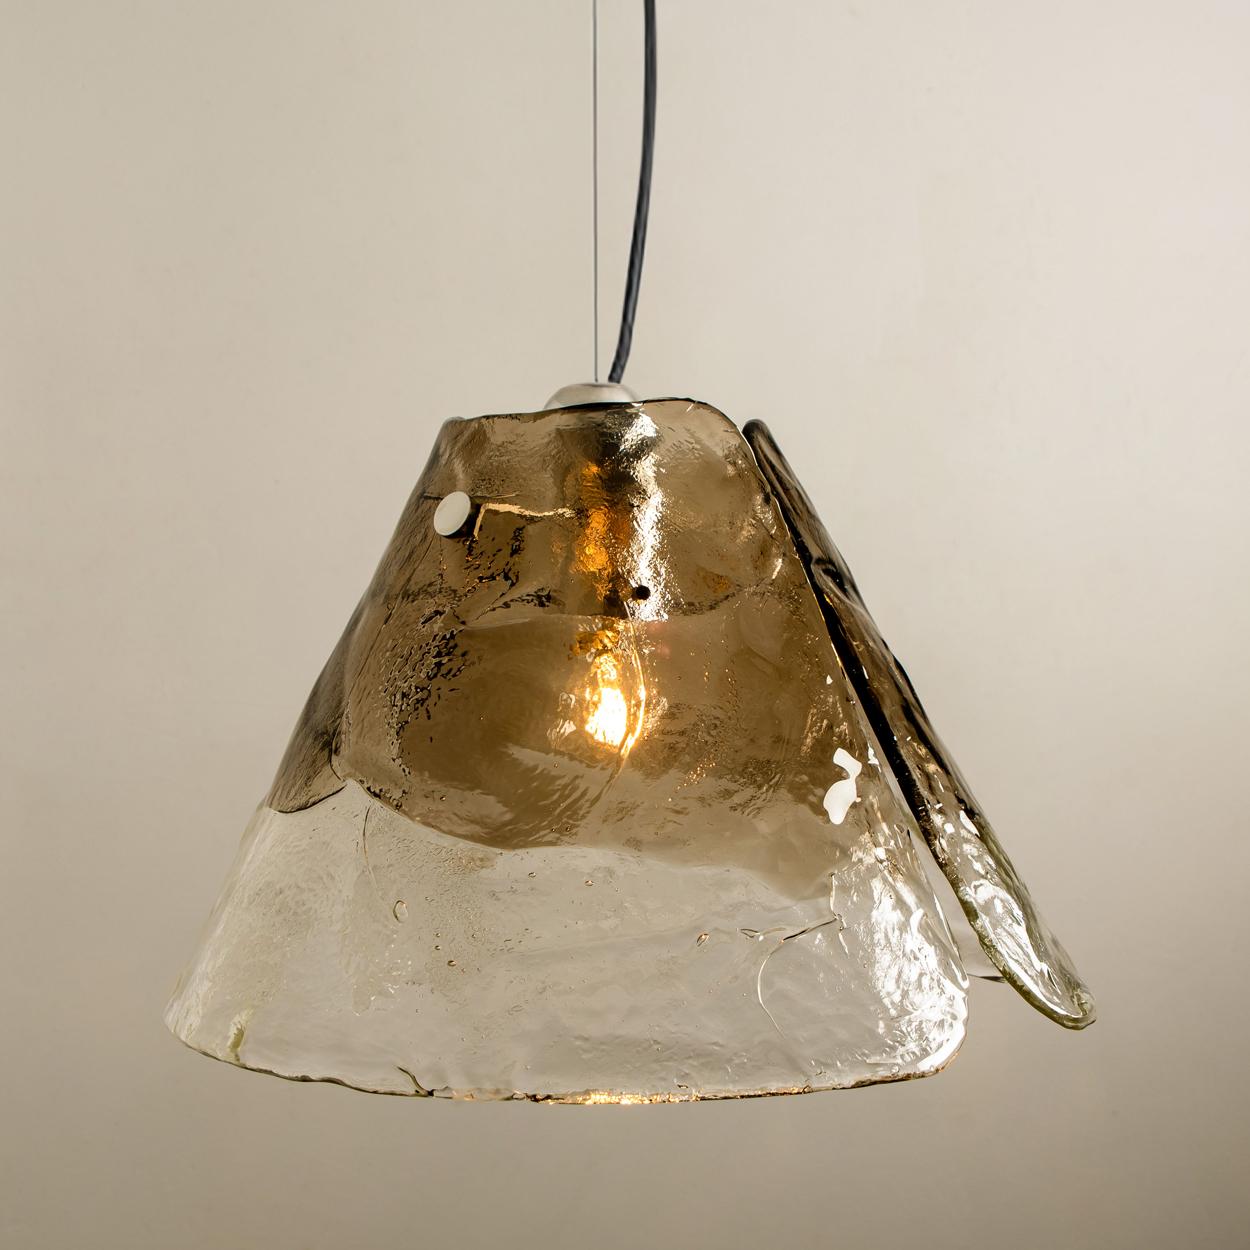 1 of the 2 Pendant Lamps by Carlo Nason for Mazzega 2